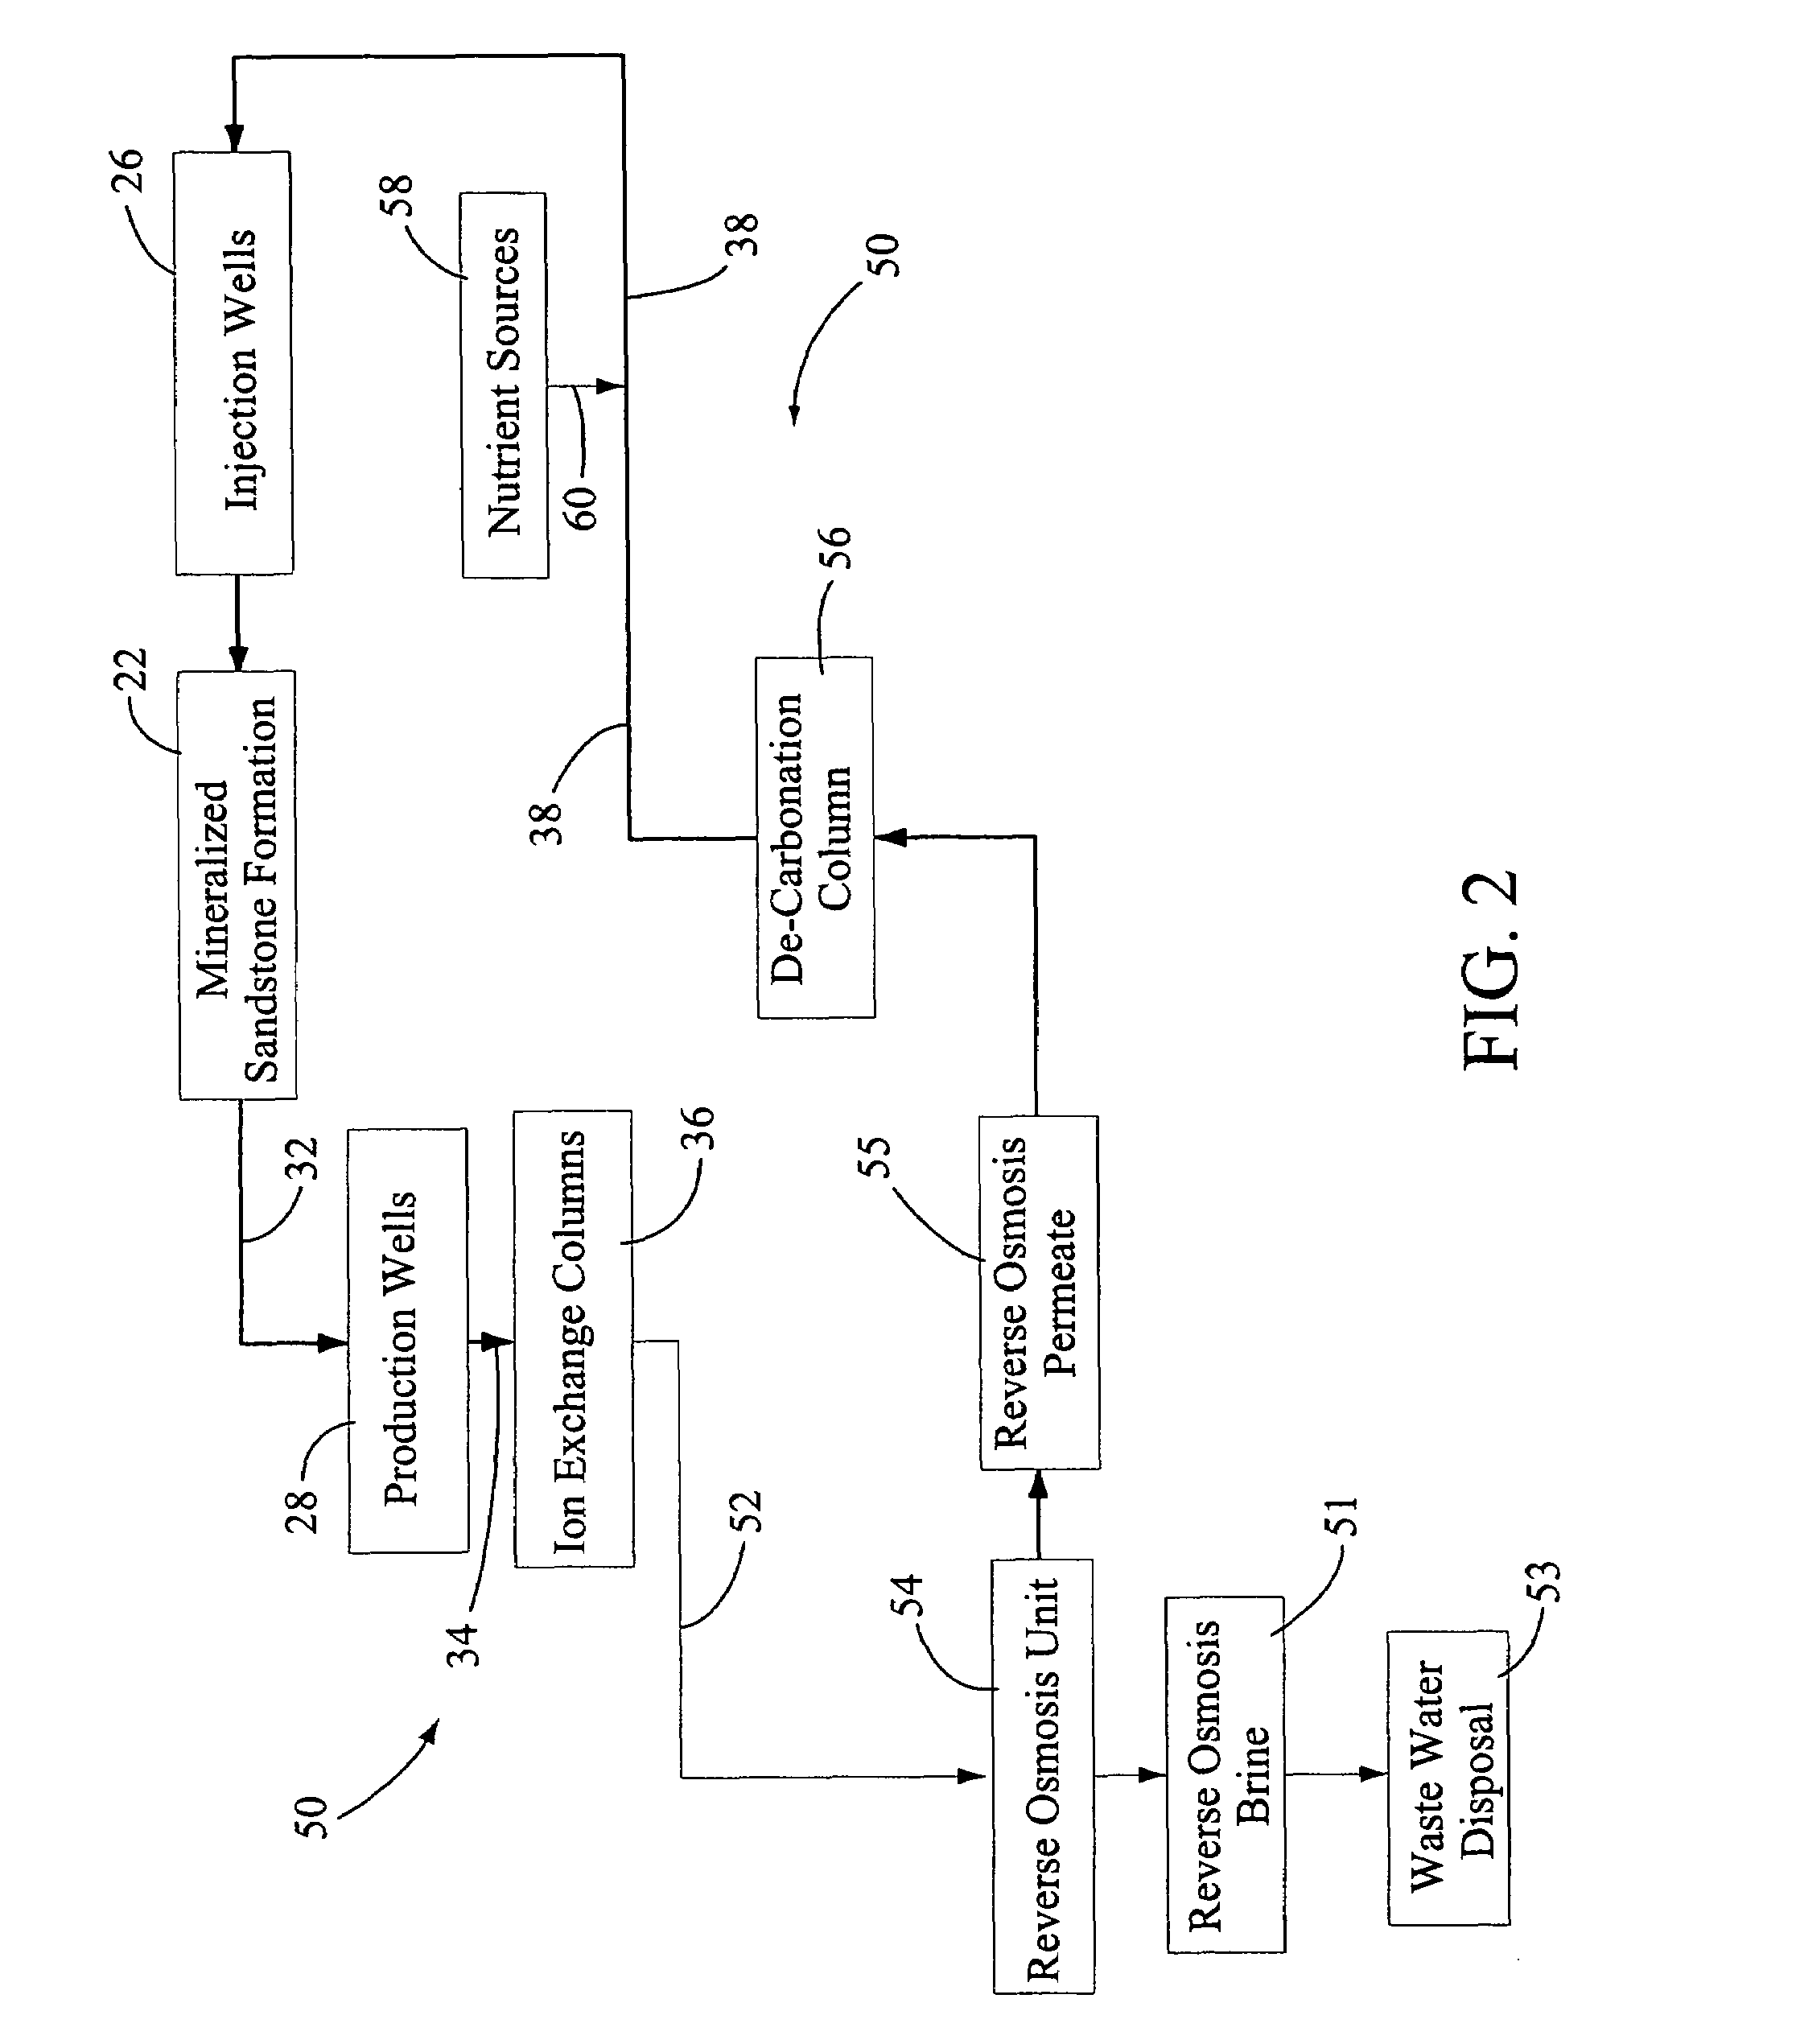 Process for restoration of ground water used in in-situ uranium mining